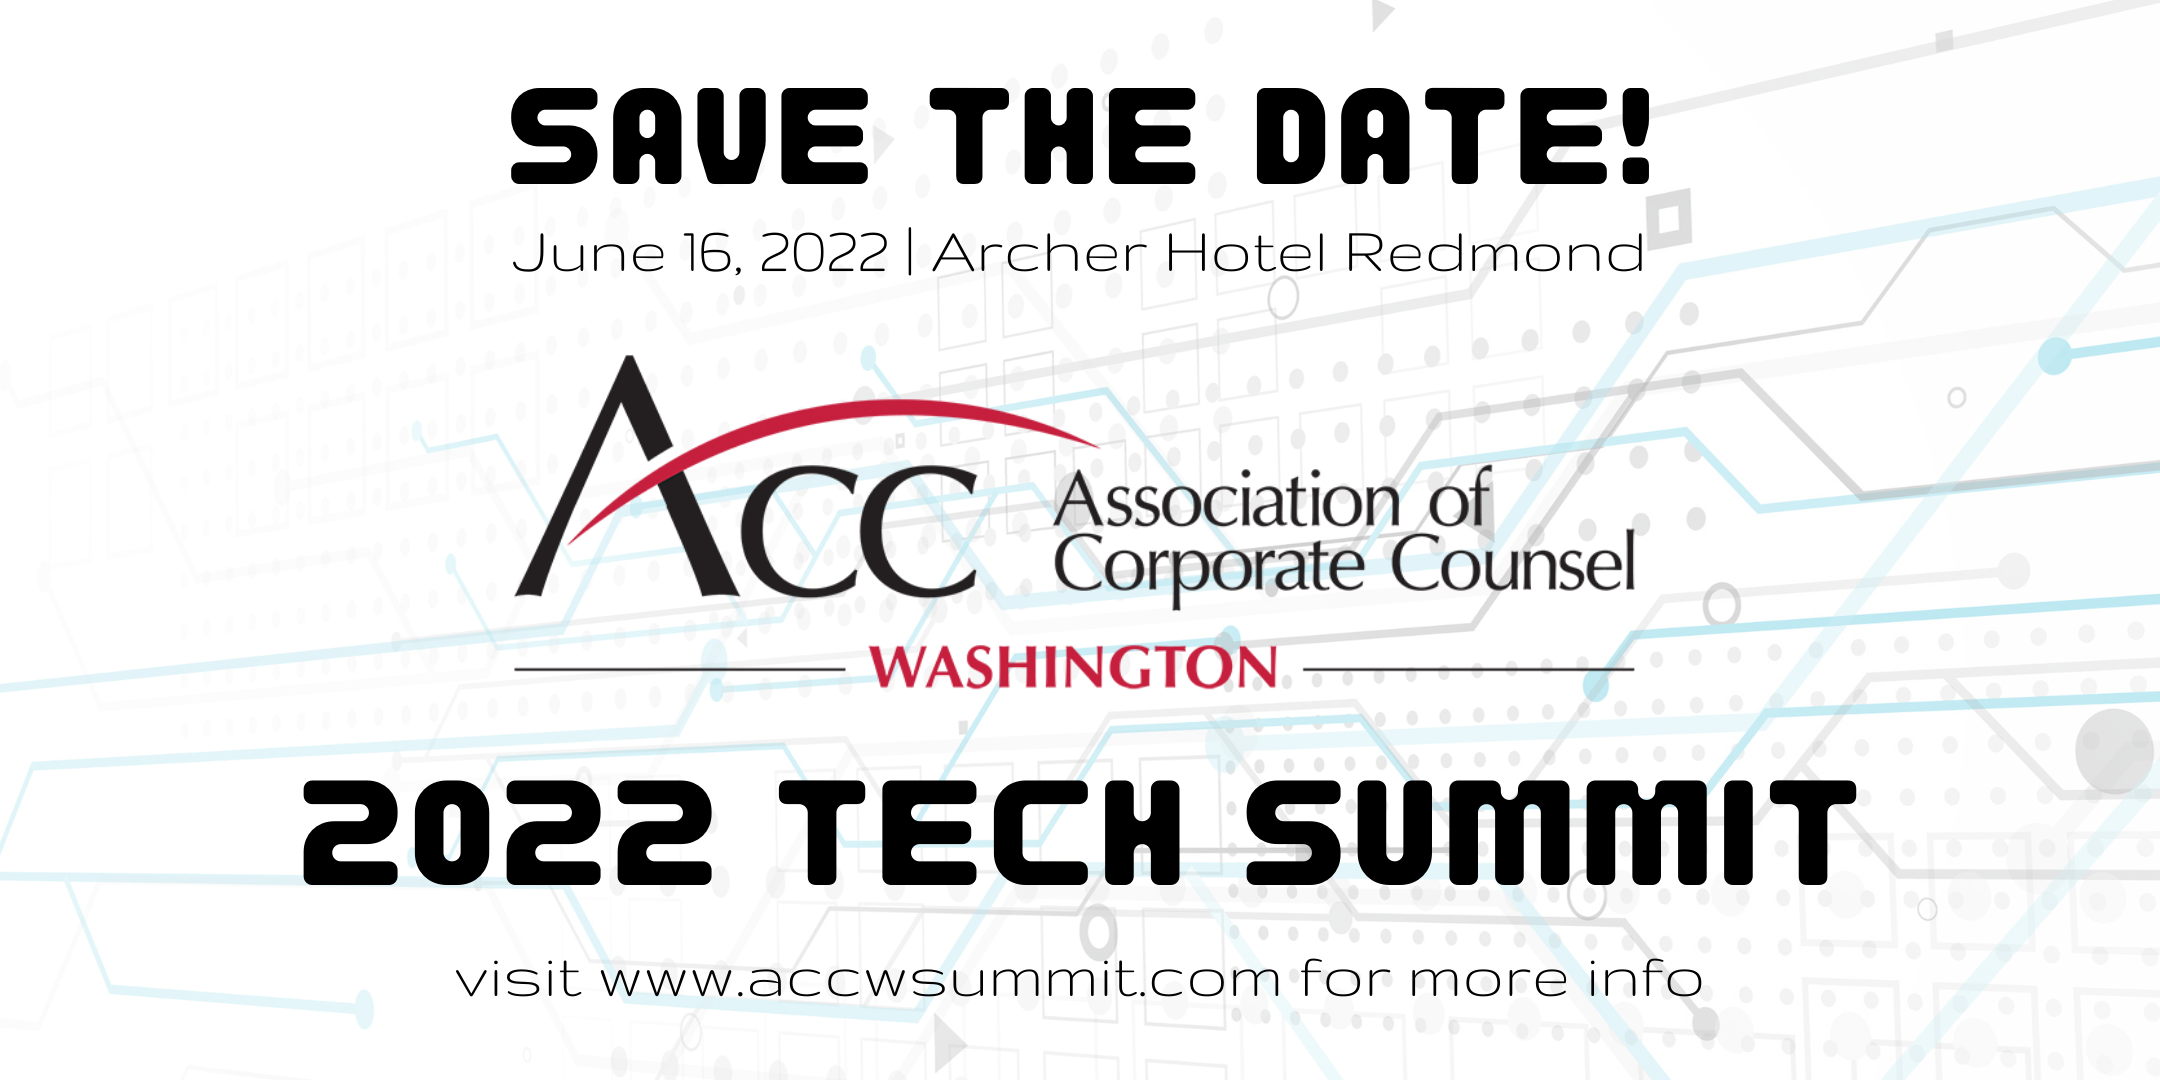 Save The Date ACCW Tech Summit June 16, 2022